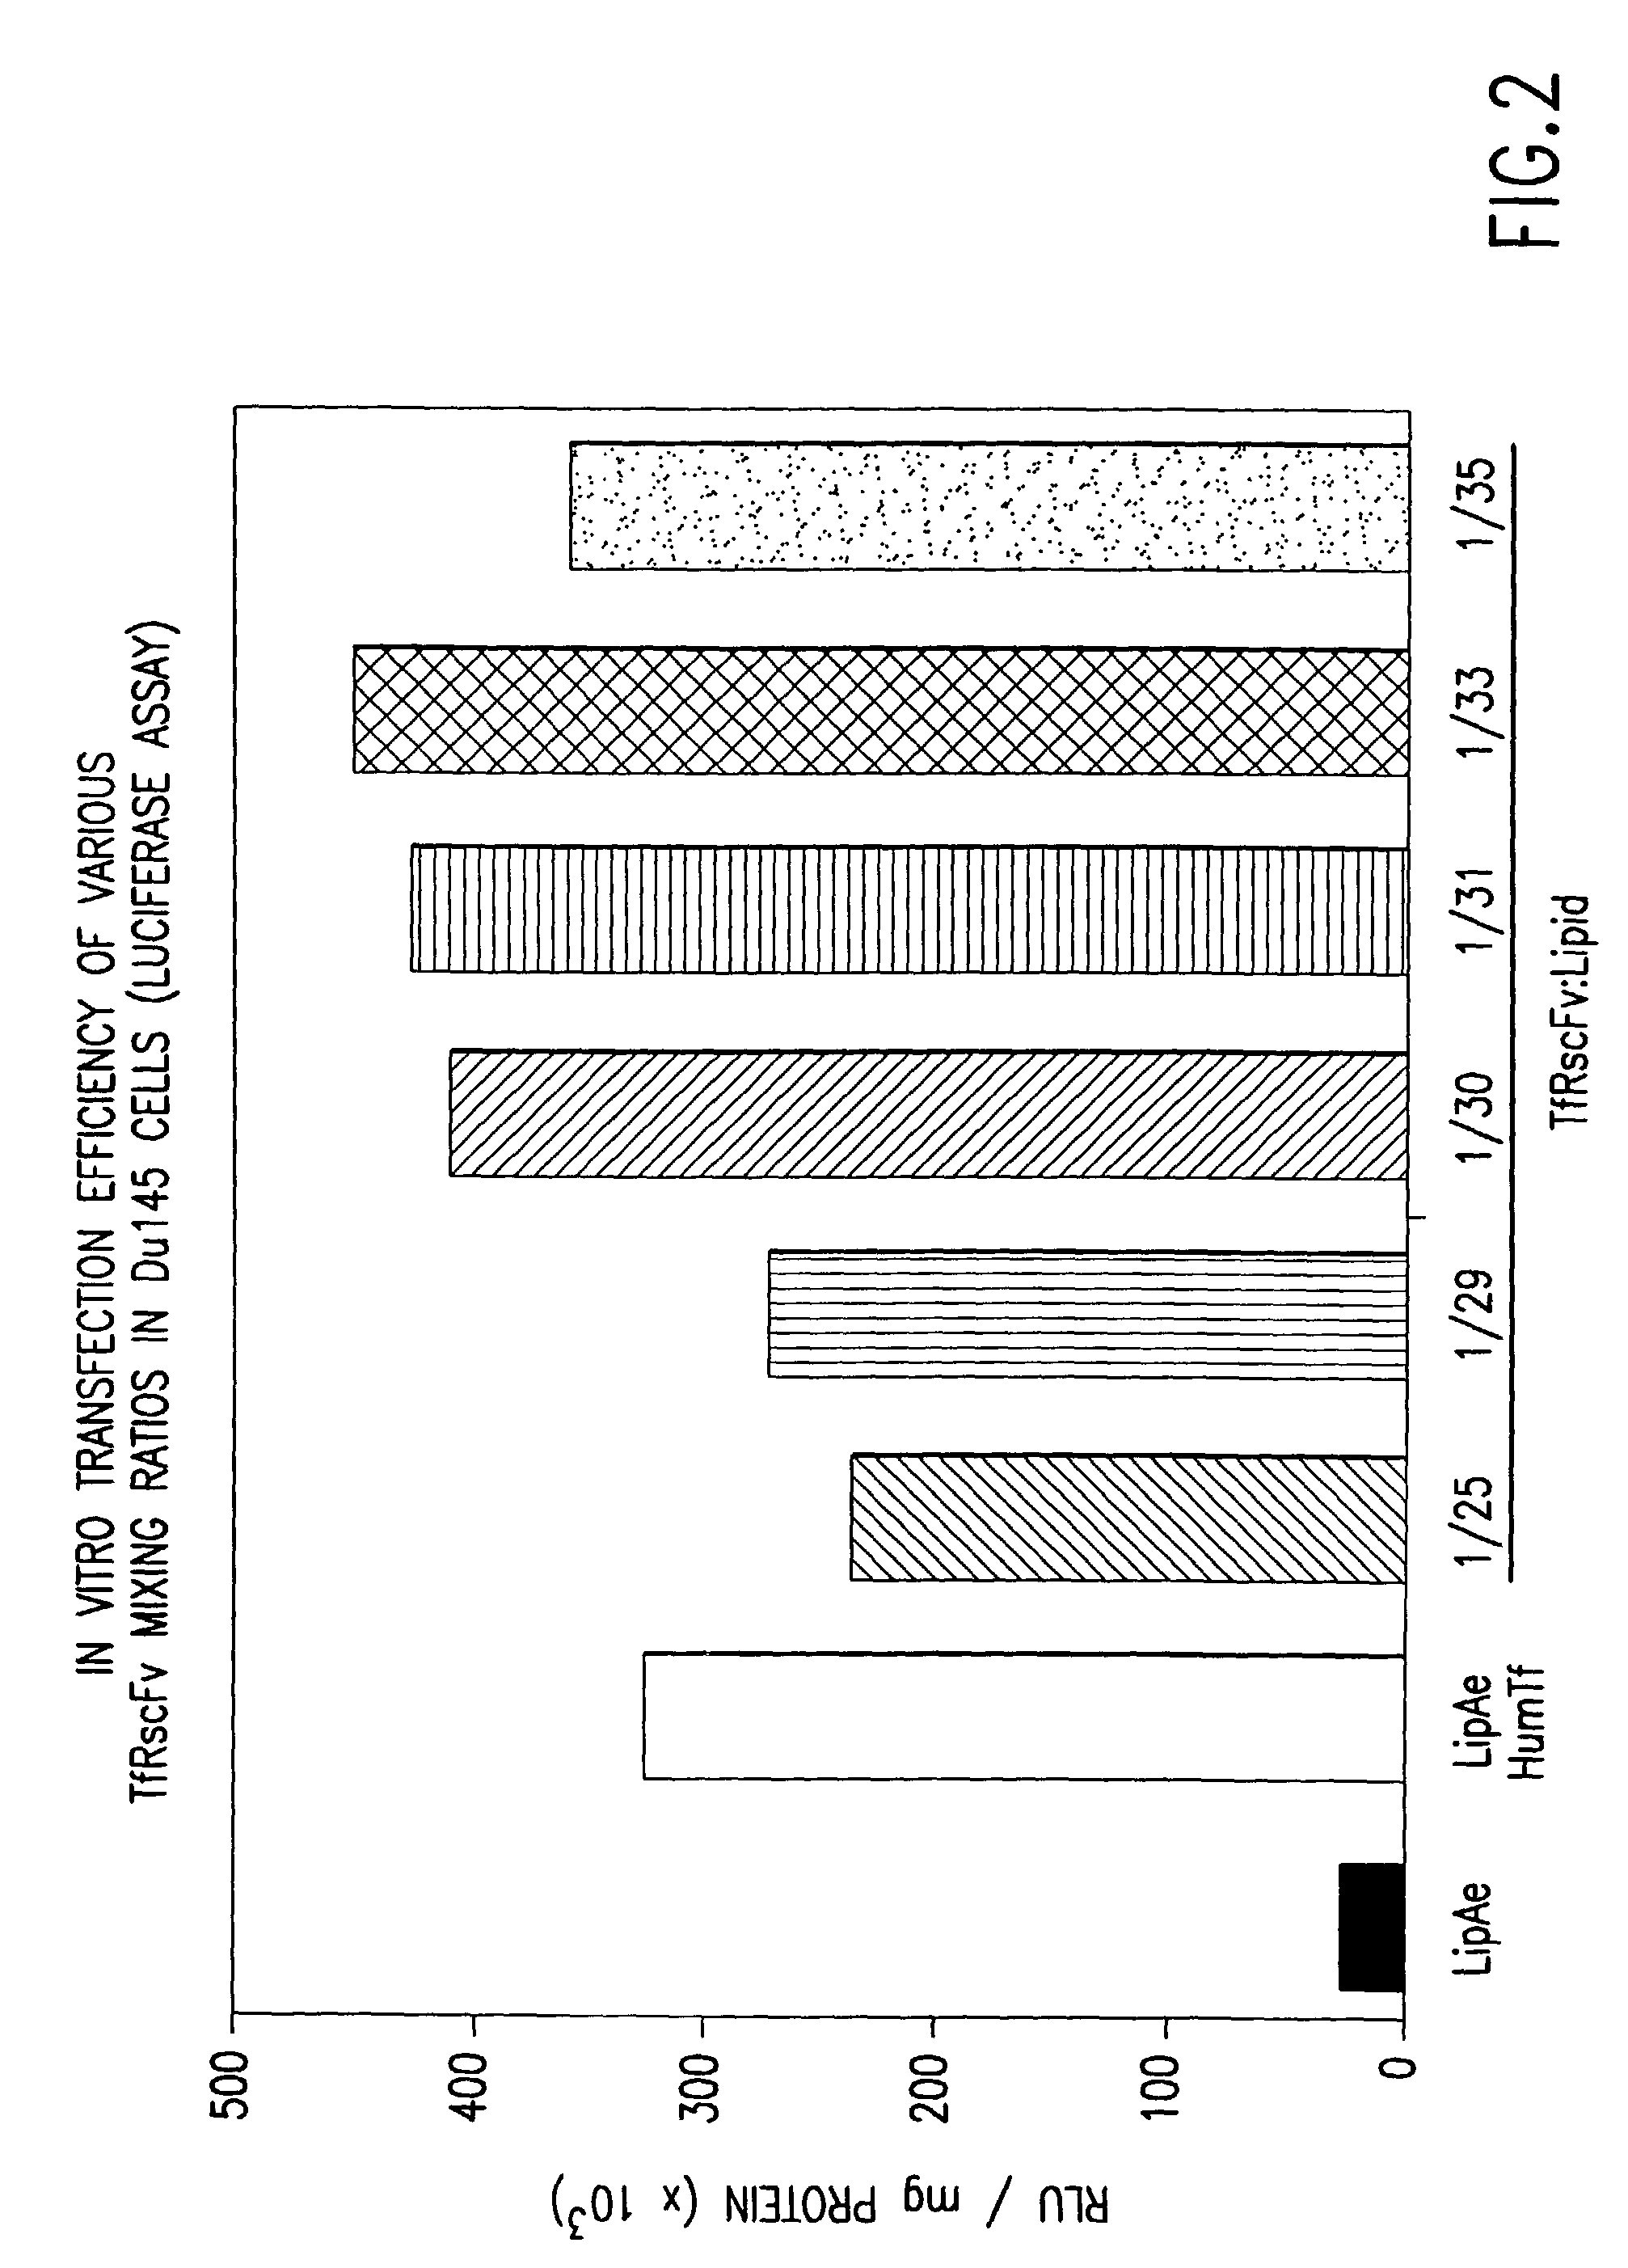 Simplified and improved method for preparing an antibody or an antibody fragment targeted immunoliposome for systemic administration of a therapeutic or diagnostic agent